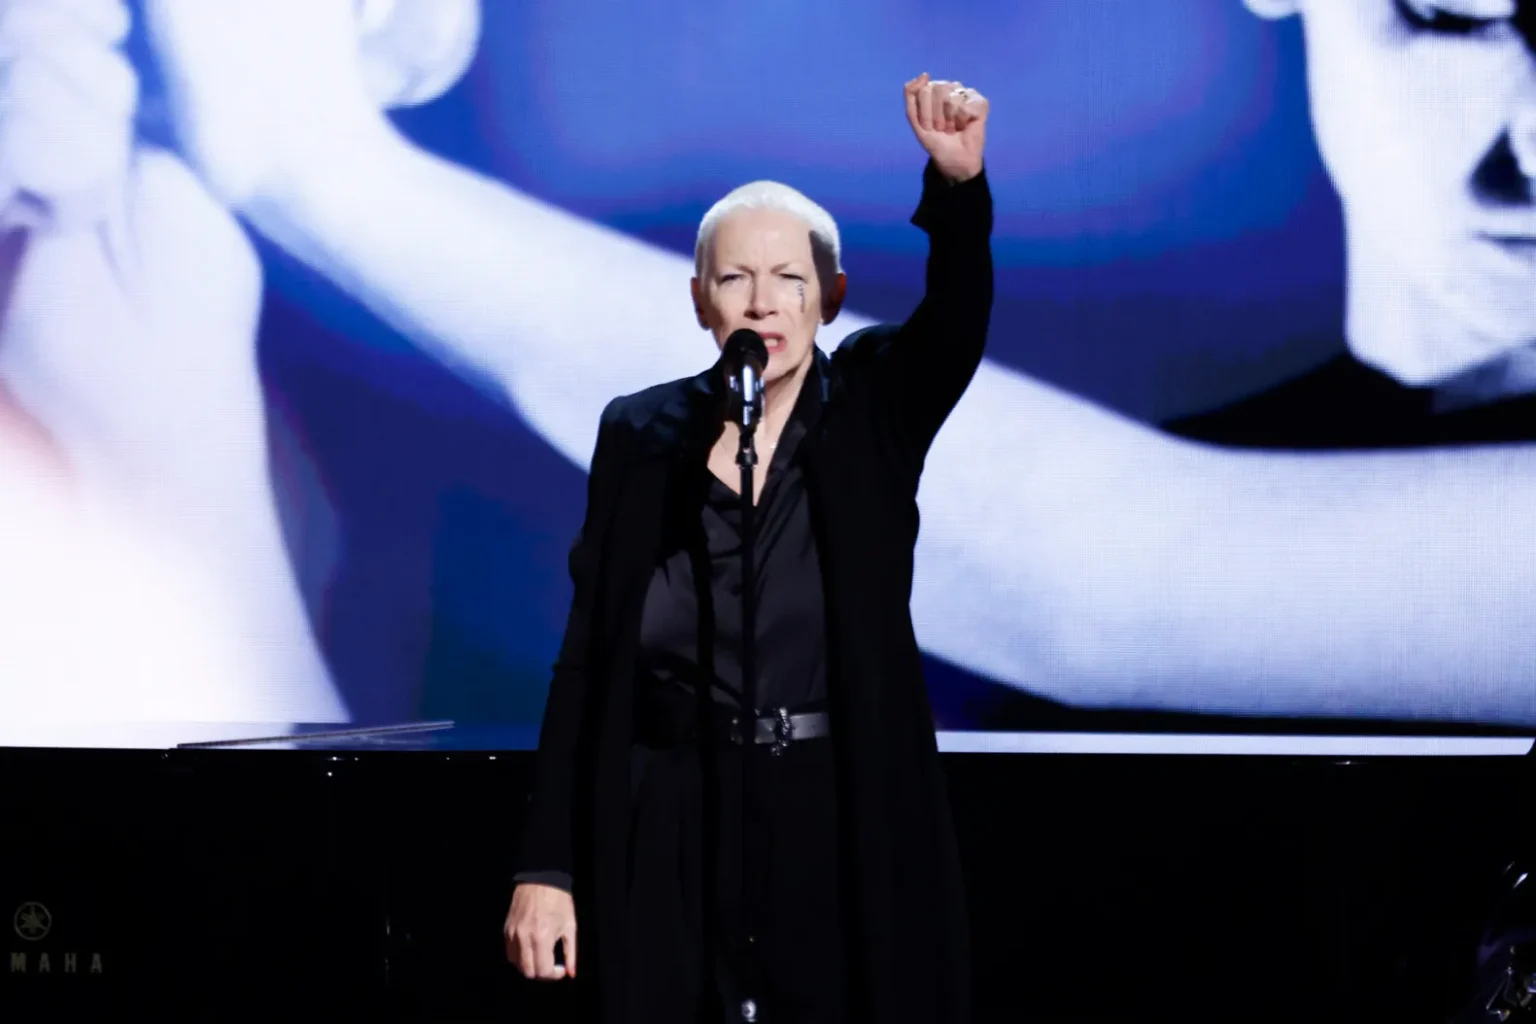 artists-for-ceasefire-annie-lennox-calls-for-ceasefire-and-peace-in-gaza-during-sinead-oconnor-tribute-at-grammys-2024